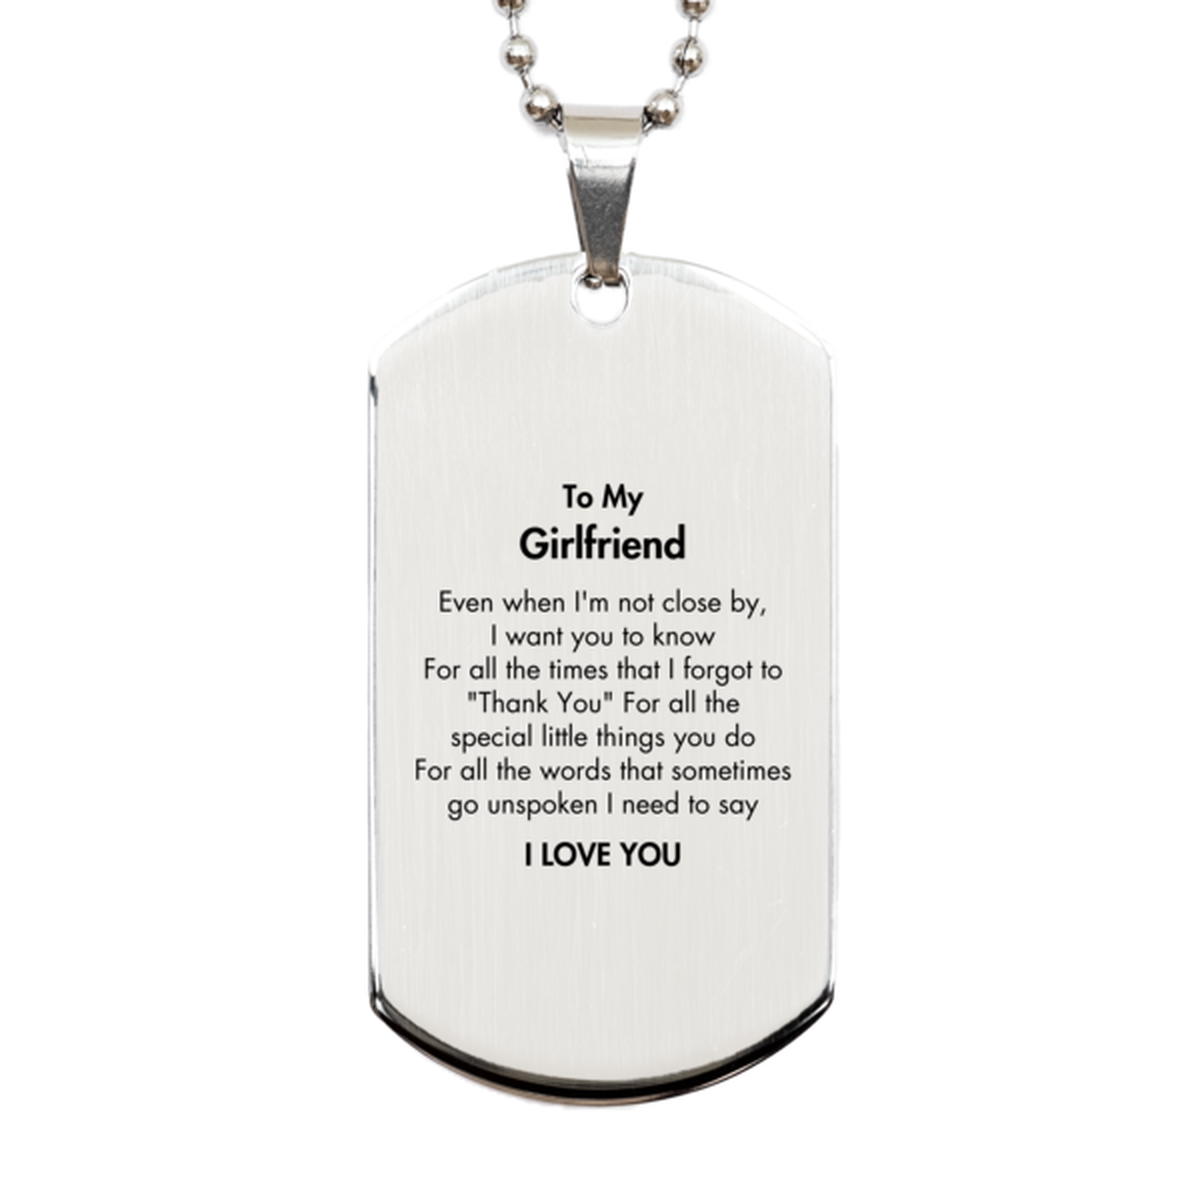 Thank You Gifts for Girlfriend, Keepsake Silver Dog Tag Gifts for Girlfriend Birthday Mother's day Father's Day Girlfriend For all the words That sometimes go unspoken I need to say I LOVE YOU